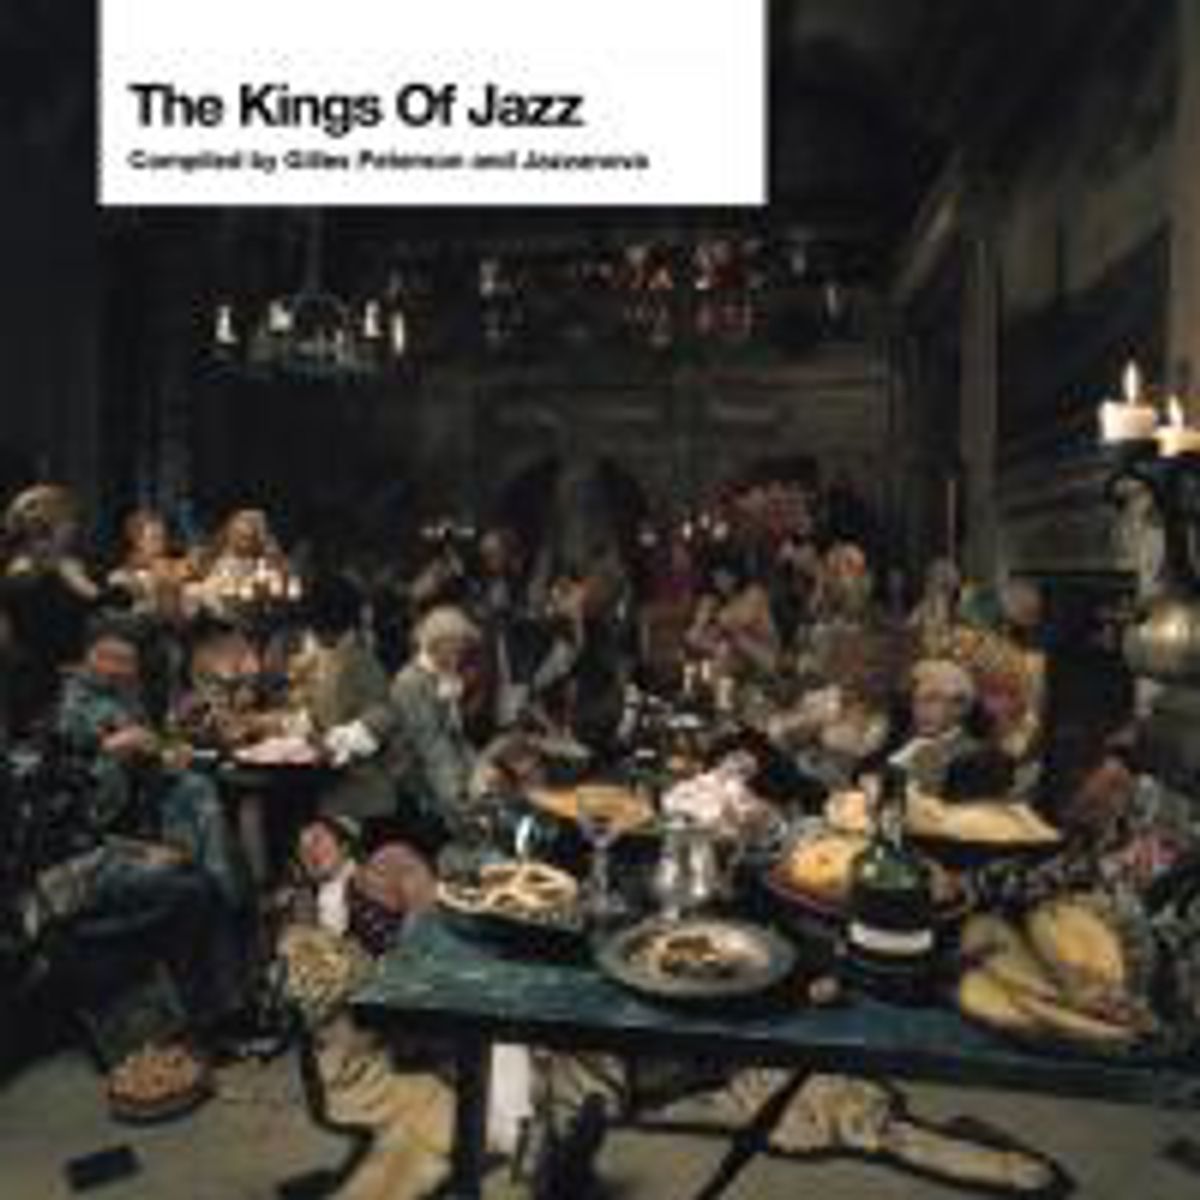 The Kings of Jazz